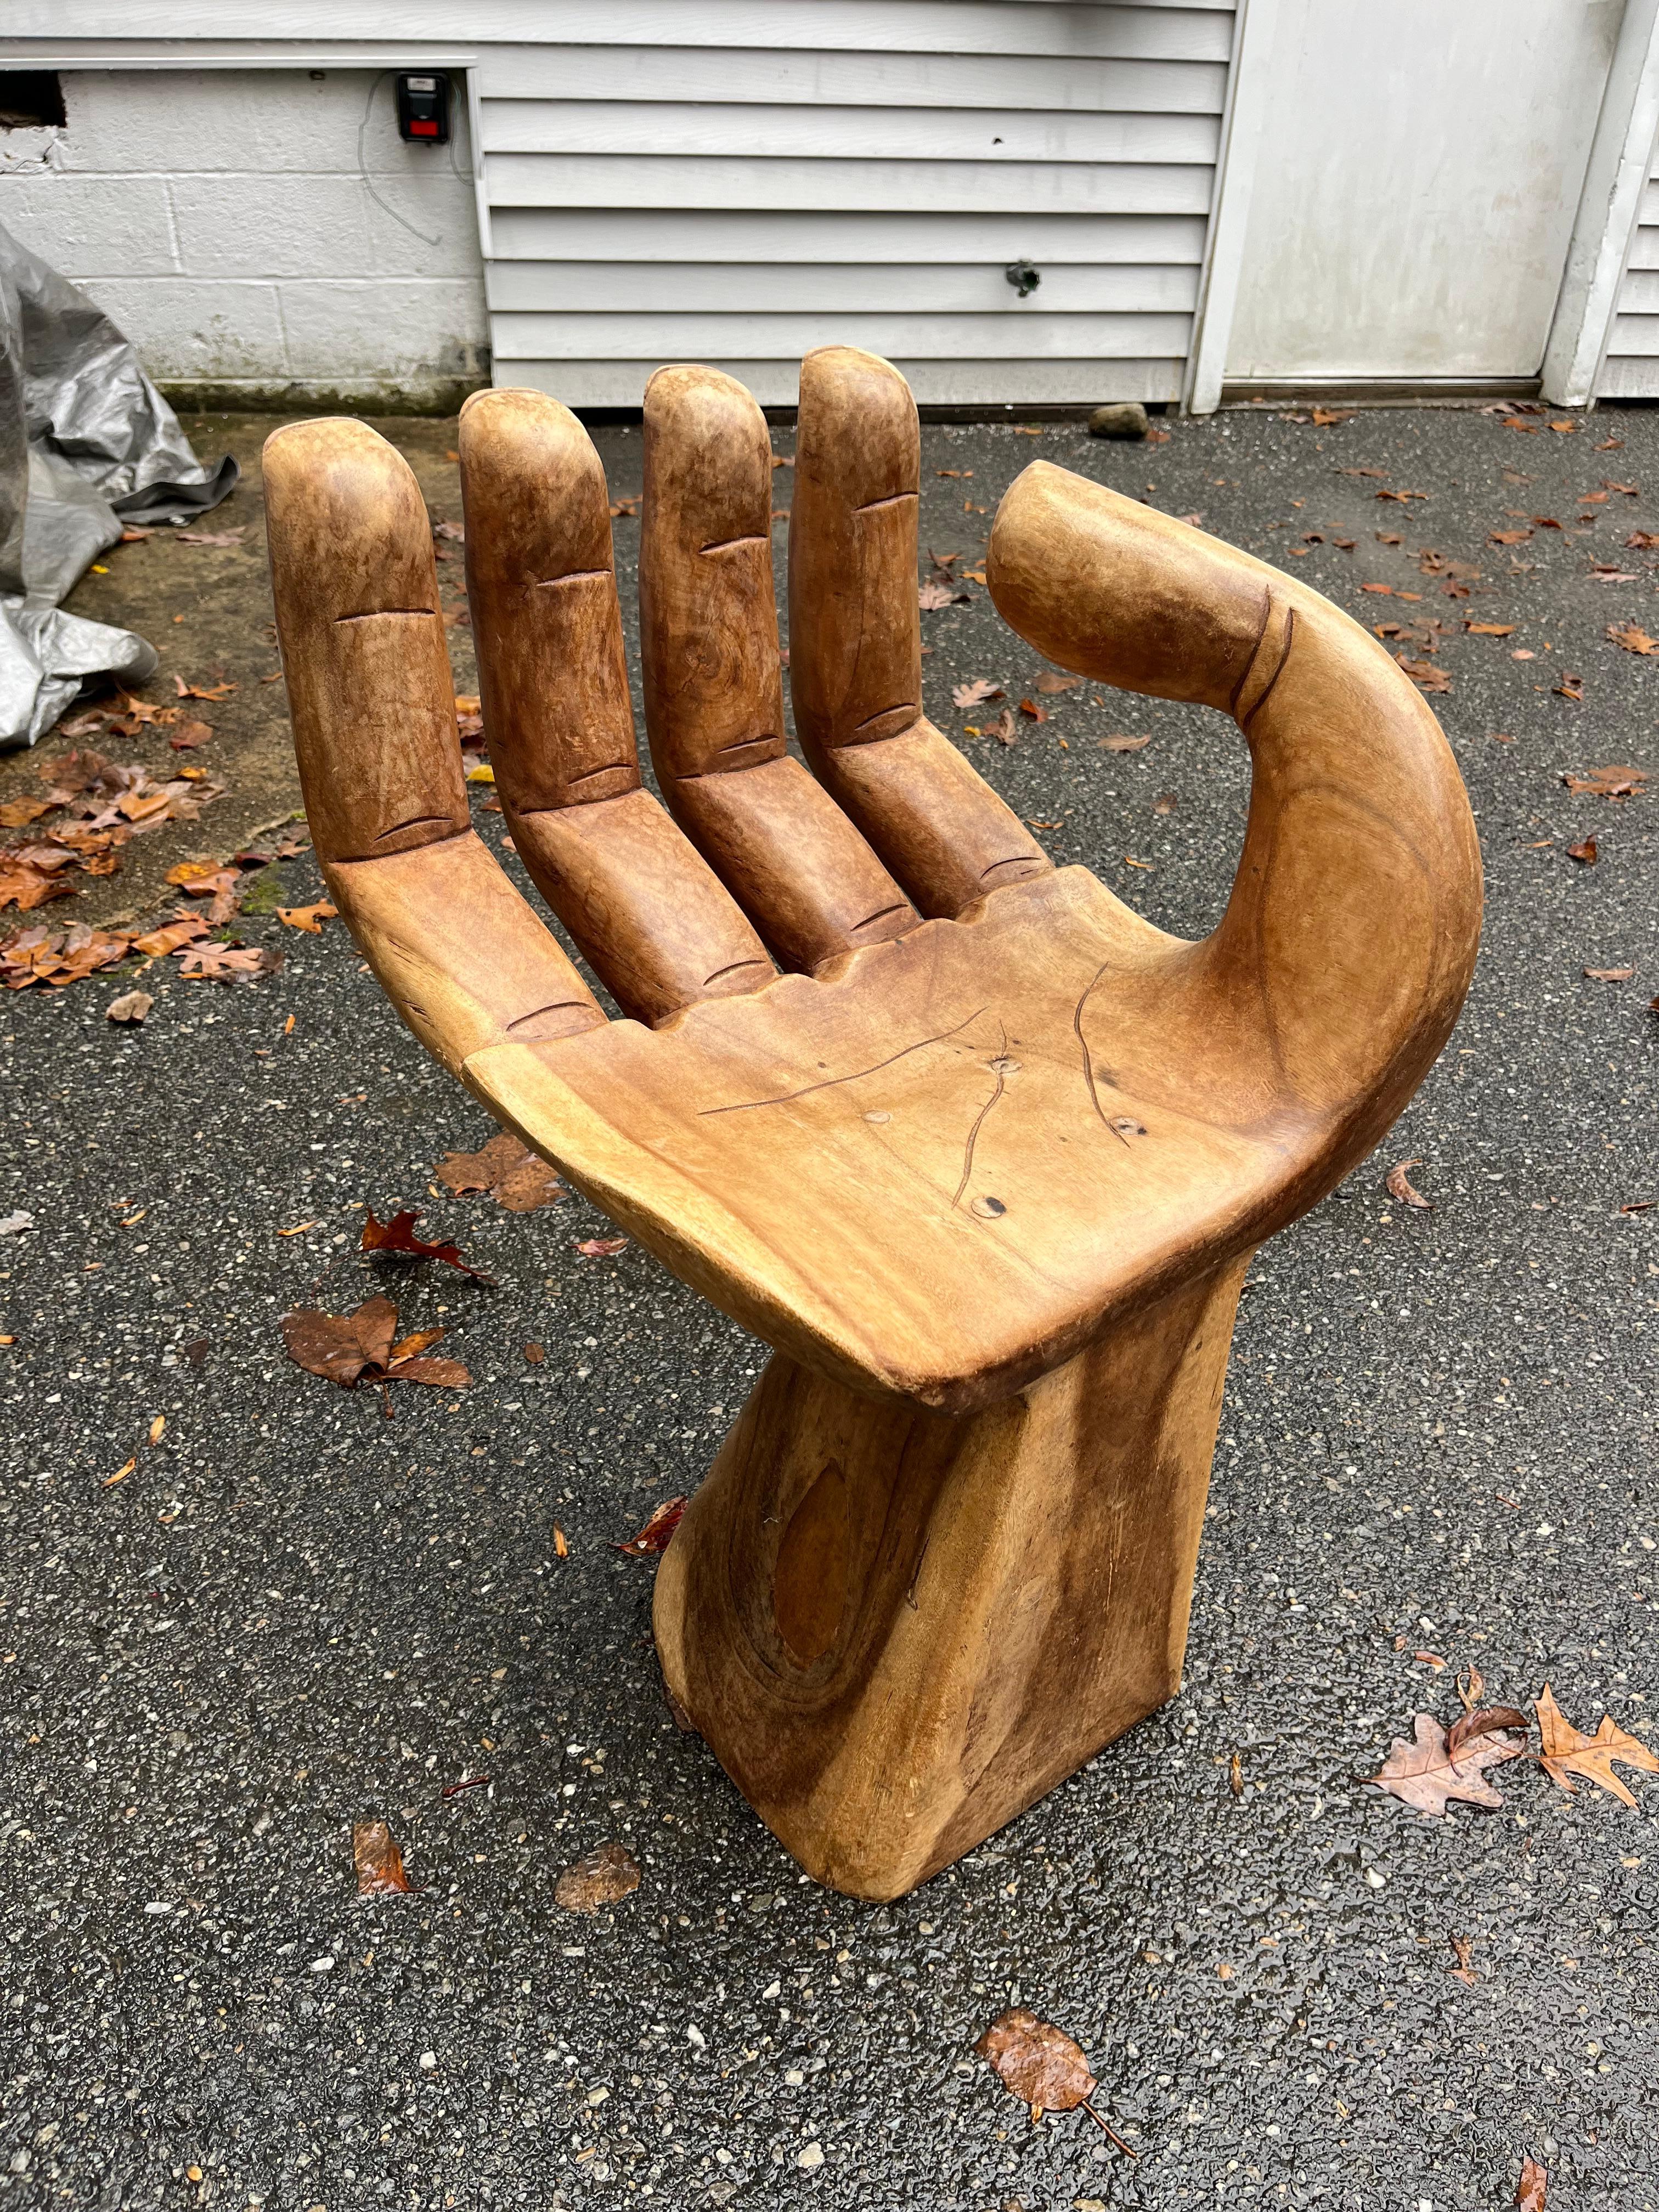 A nice early “Hand” chair circa 1970, after the artist Pedro Friedeberg, carved in walnut with a nice patina and details. Nice smaller scale - would make a cool desk chair for a kid. 